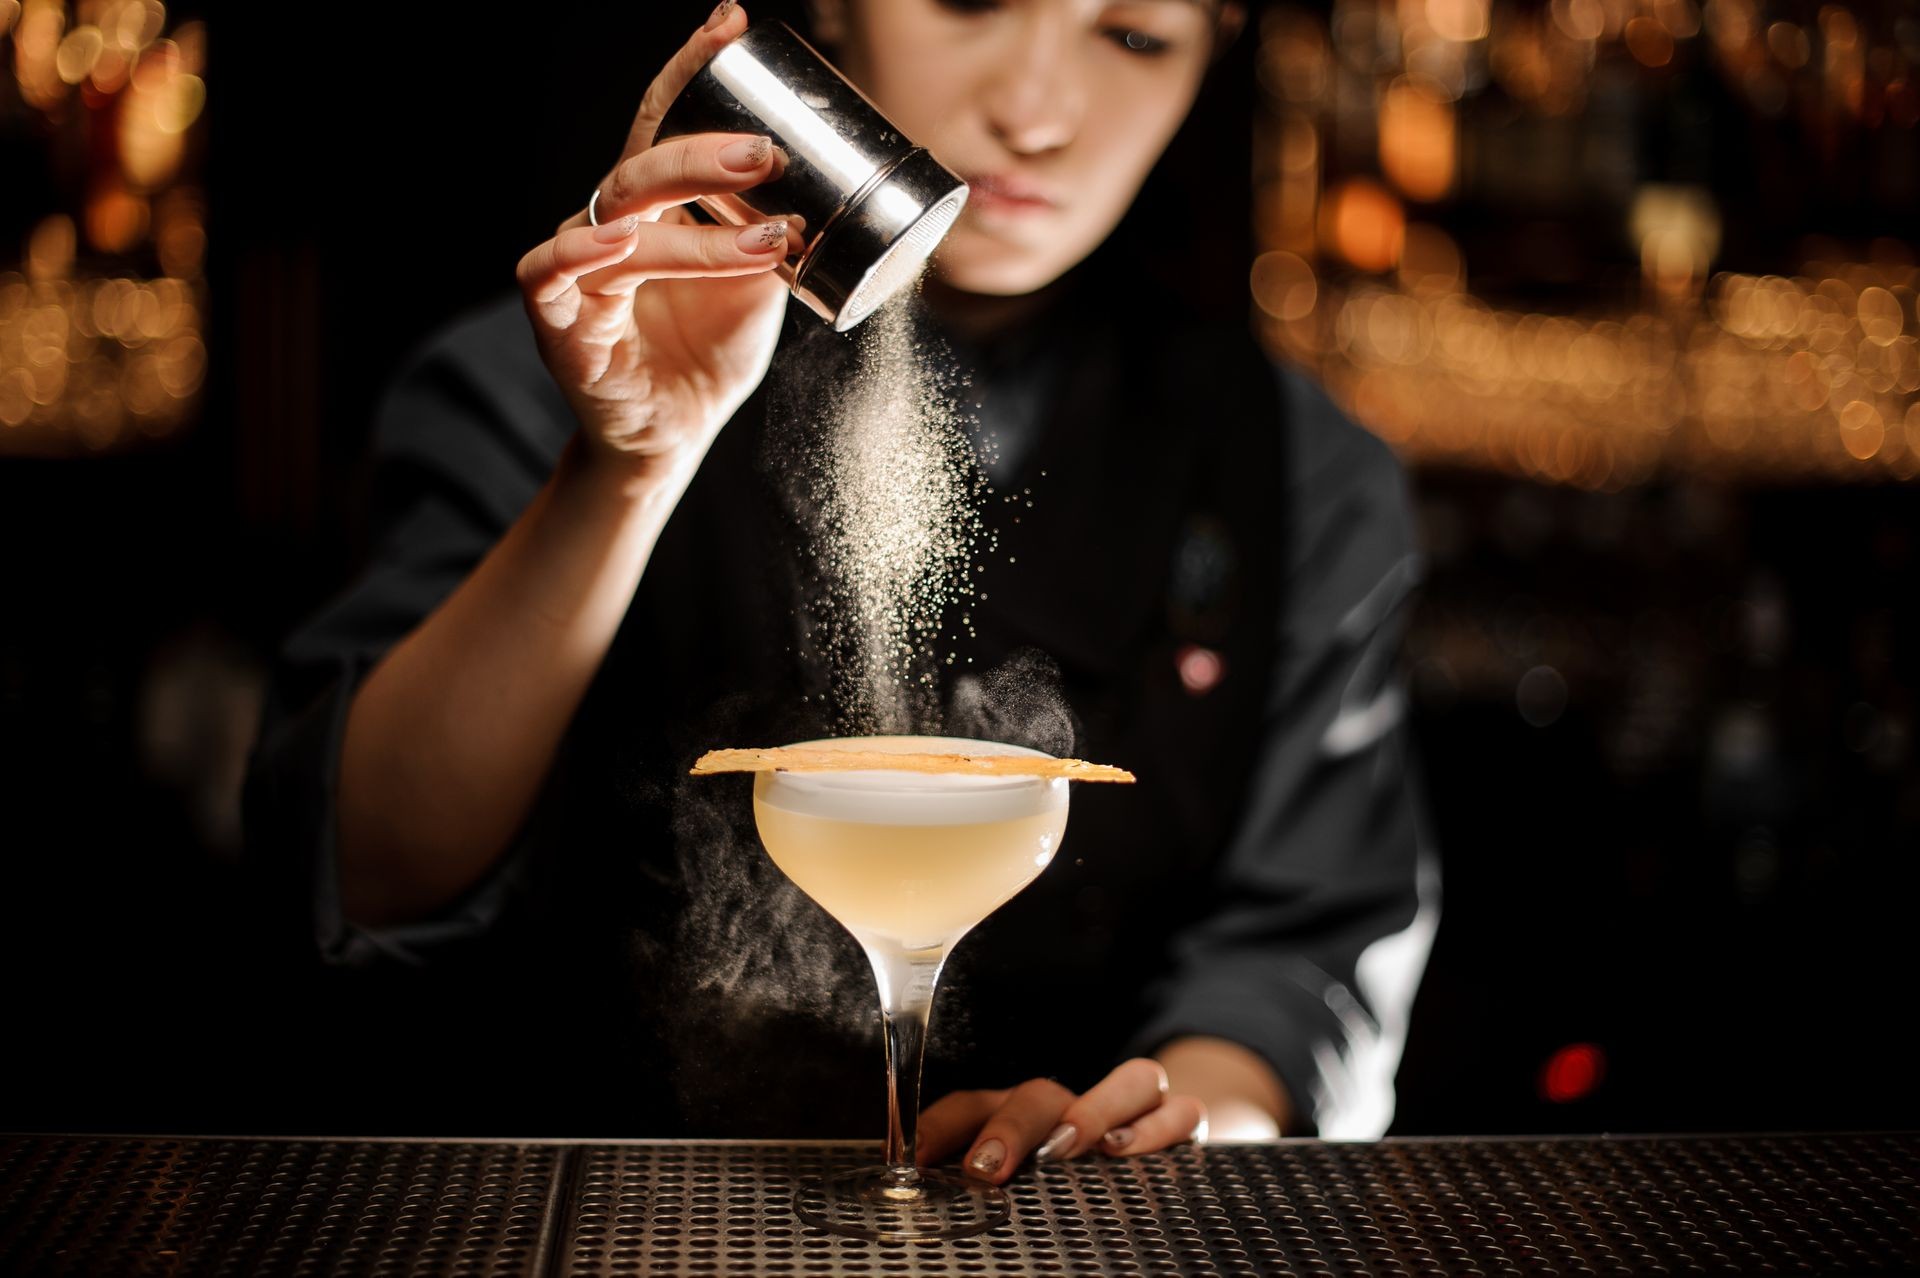 Professional bartender girl holding a spice shaker adding to a delicious cocktail flavours on the bar counter in the blurred background